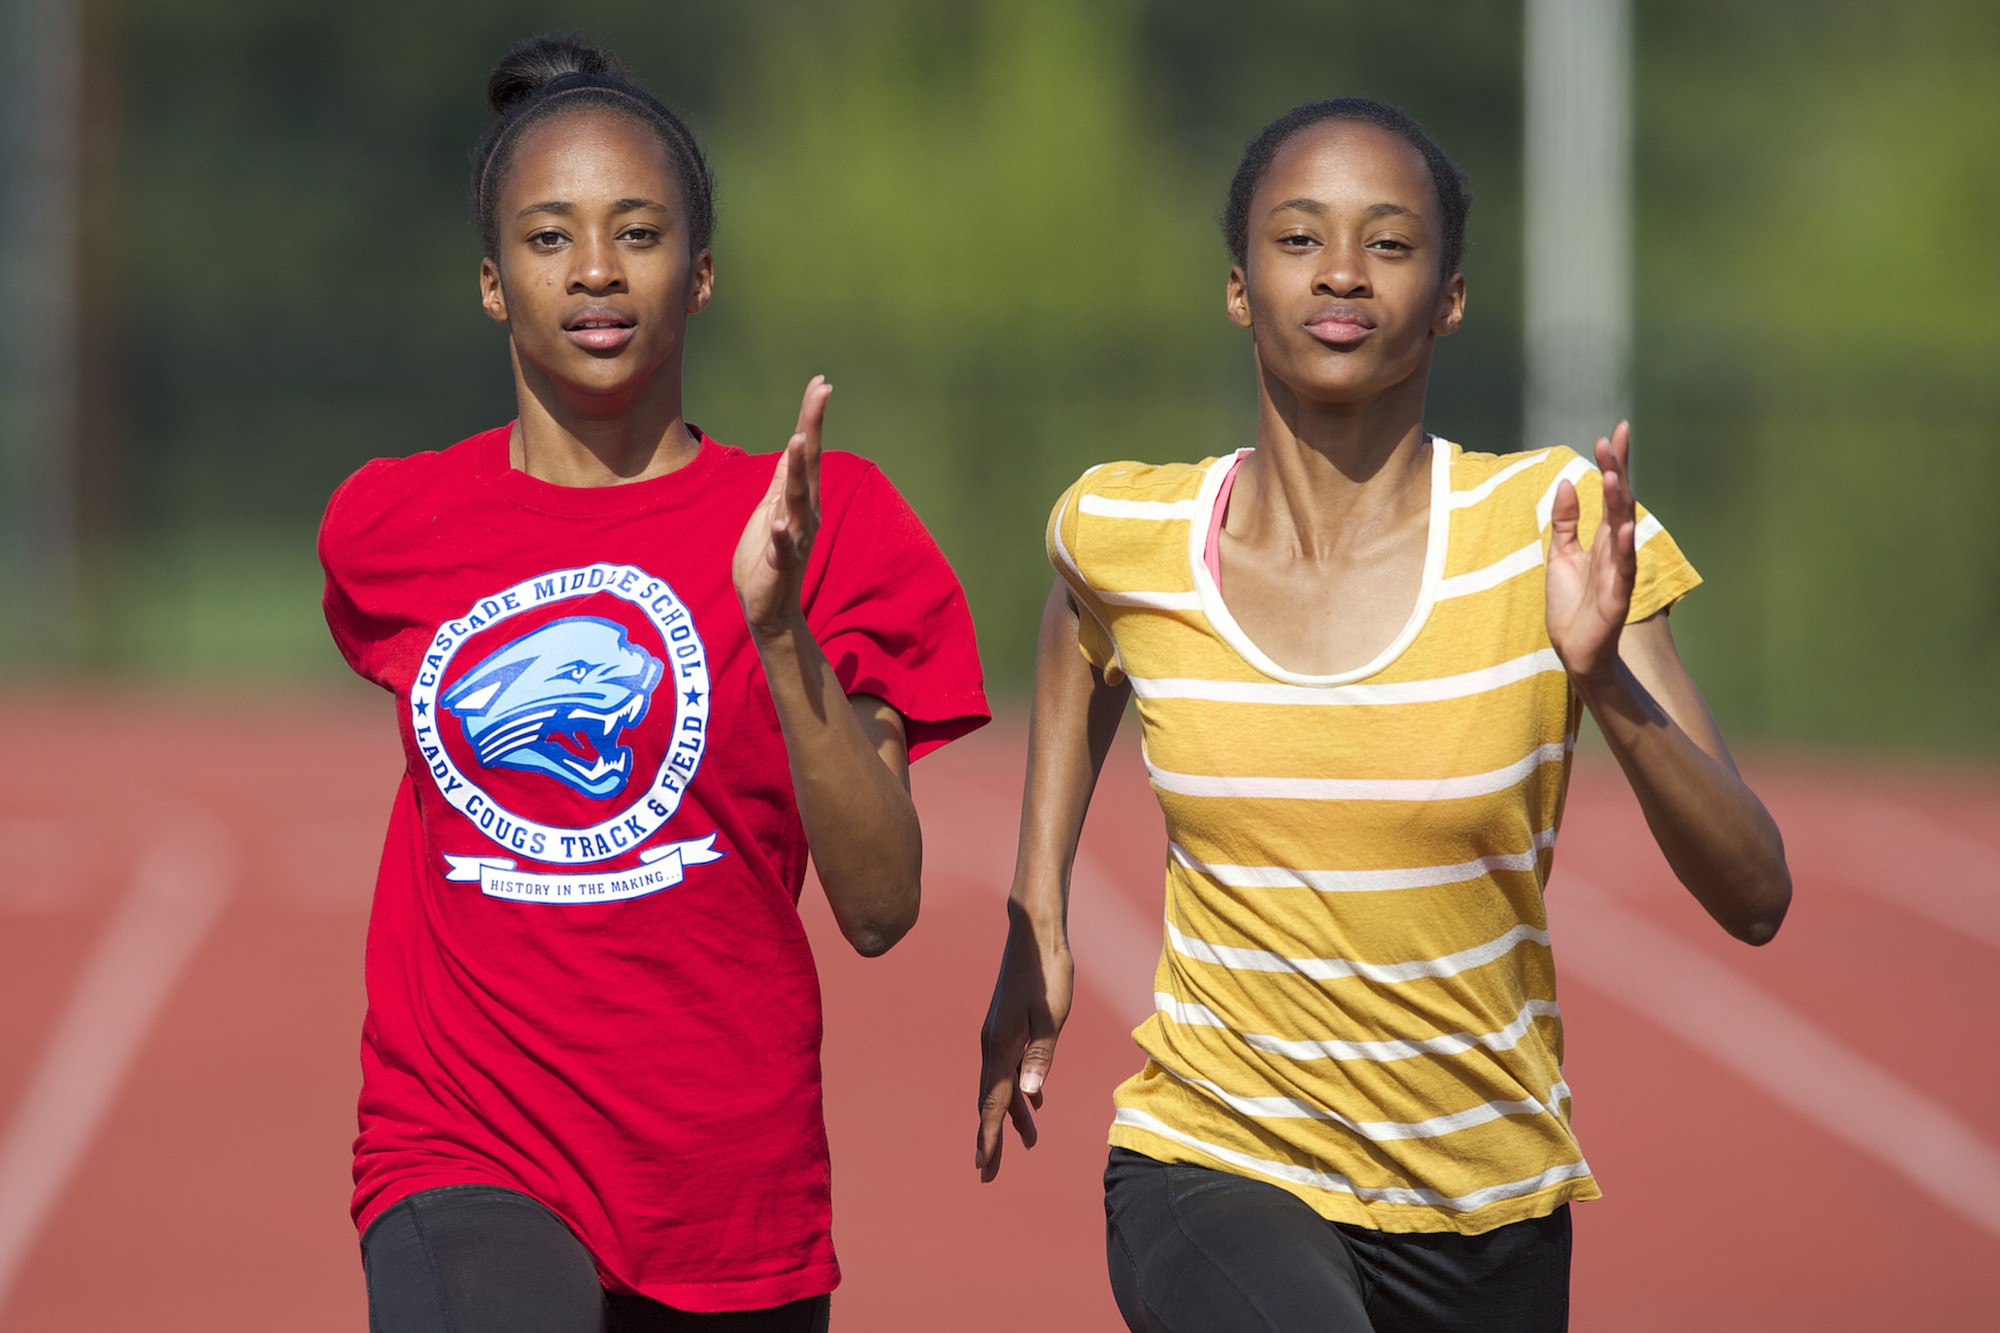 Union High School's identical twin sisters Dai'lyn, left, and Jai'lyn Merriweather shown, Thursday, April 30, 2015, are two of the top sprinters in the state.